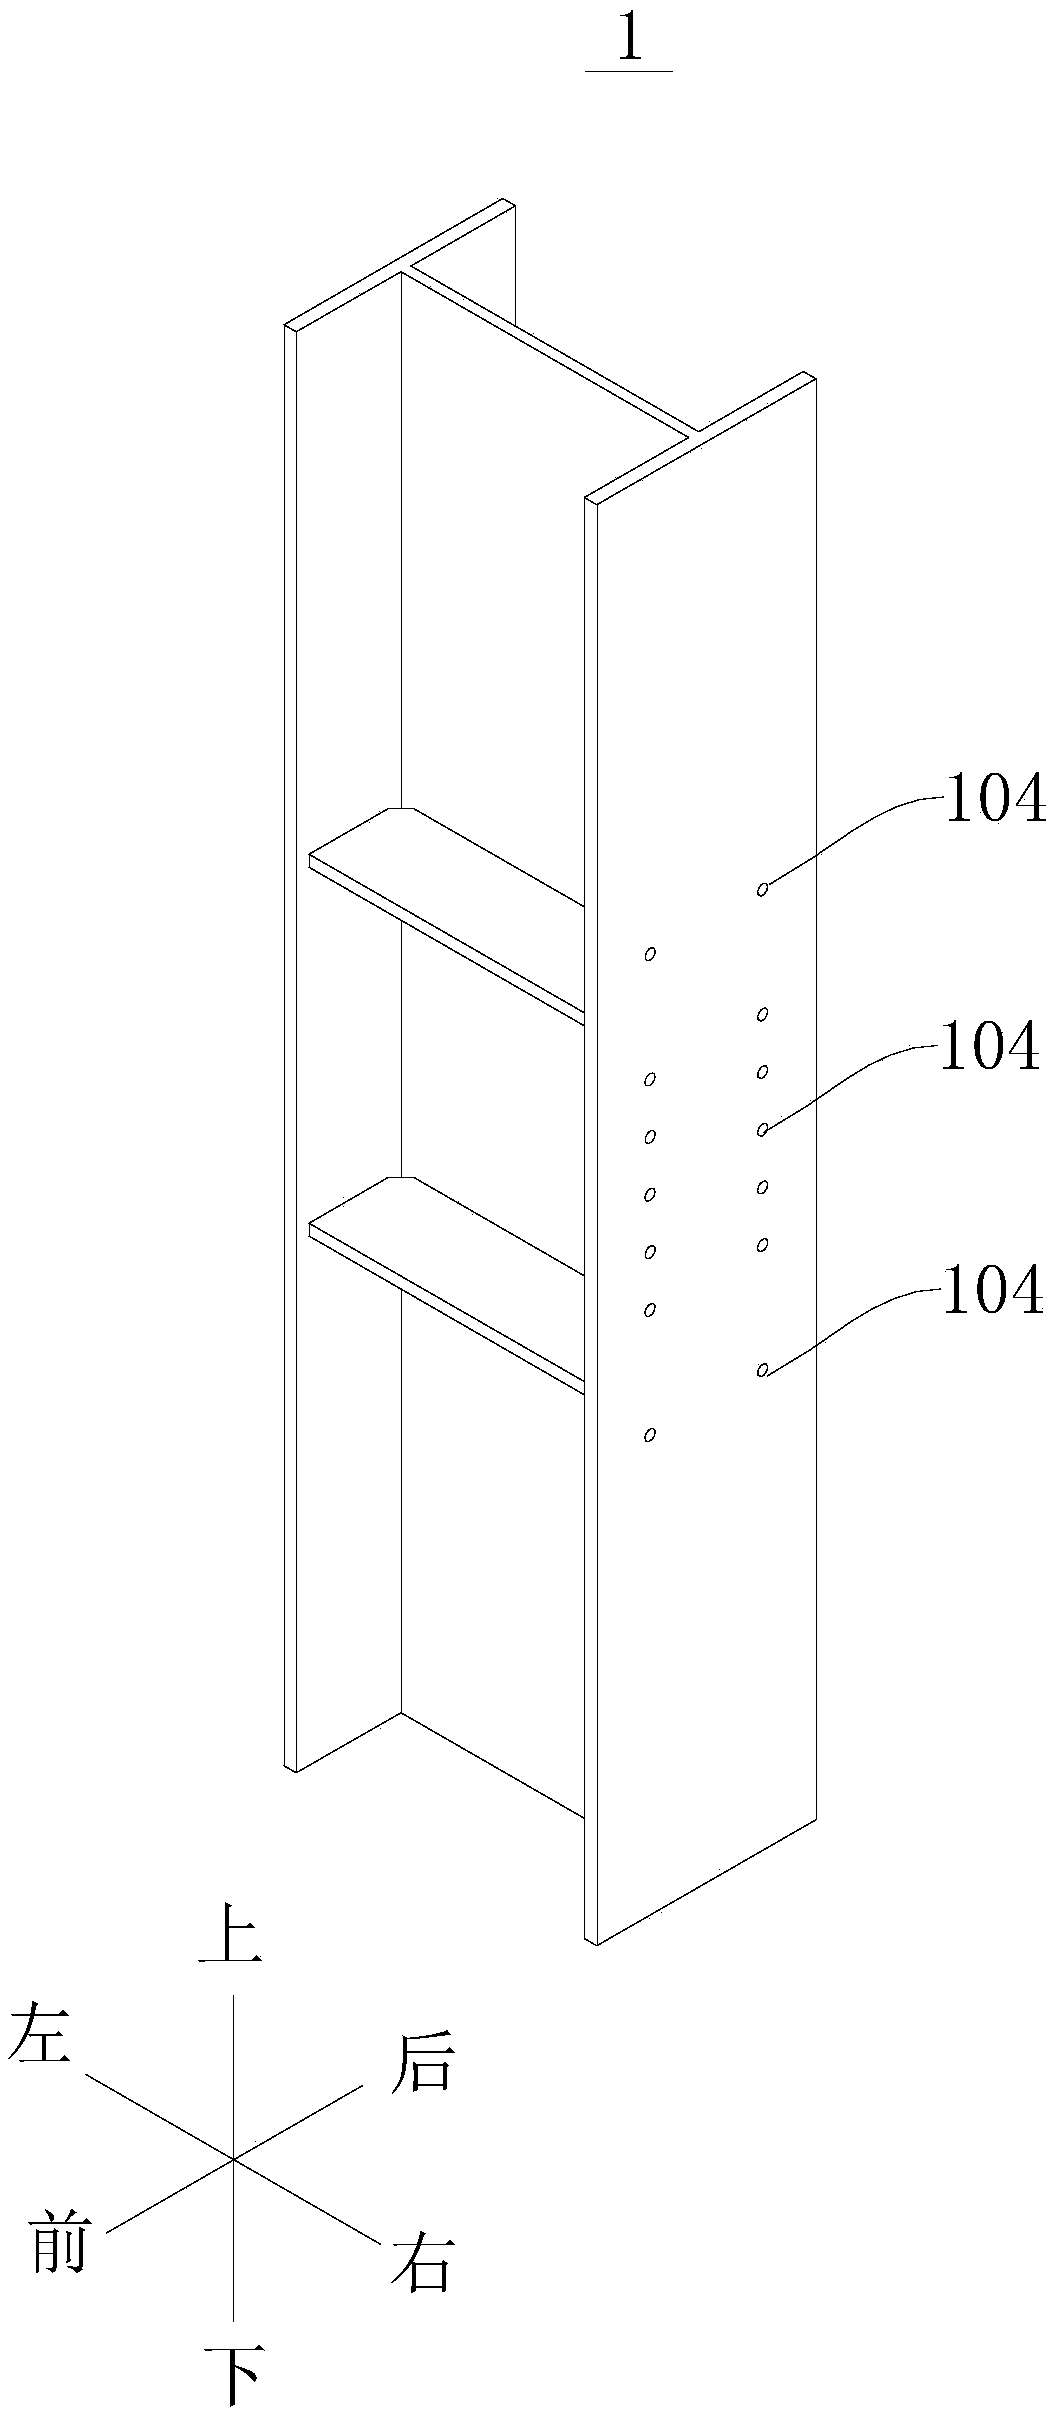 Frame beam and column connecting joint comprising replaceable energy dissipation part